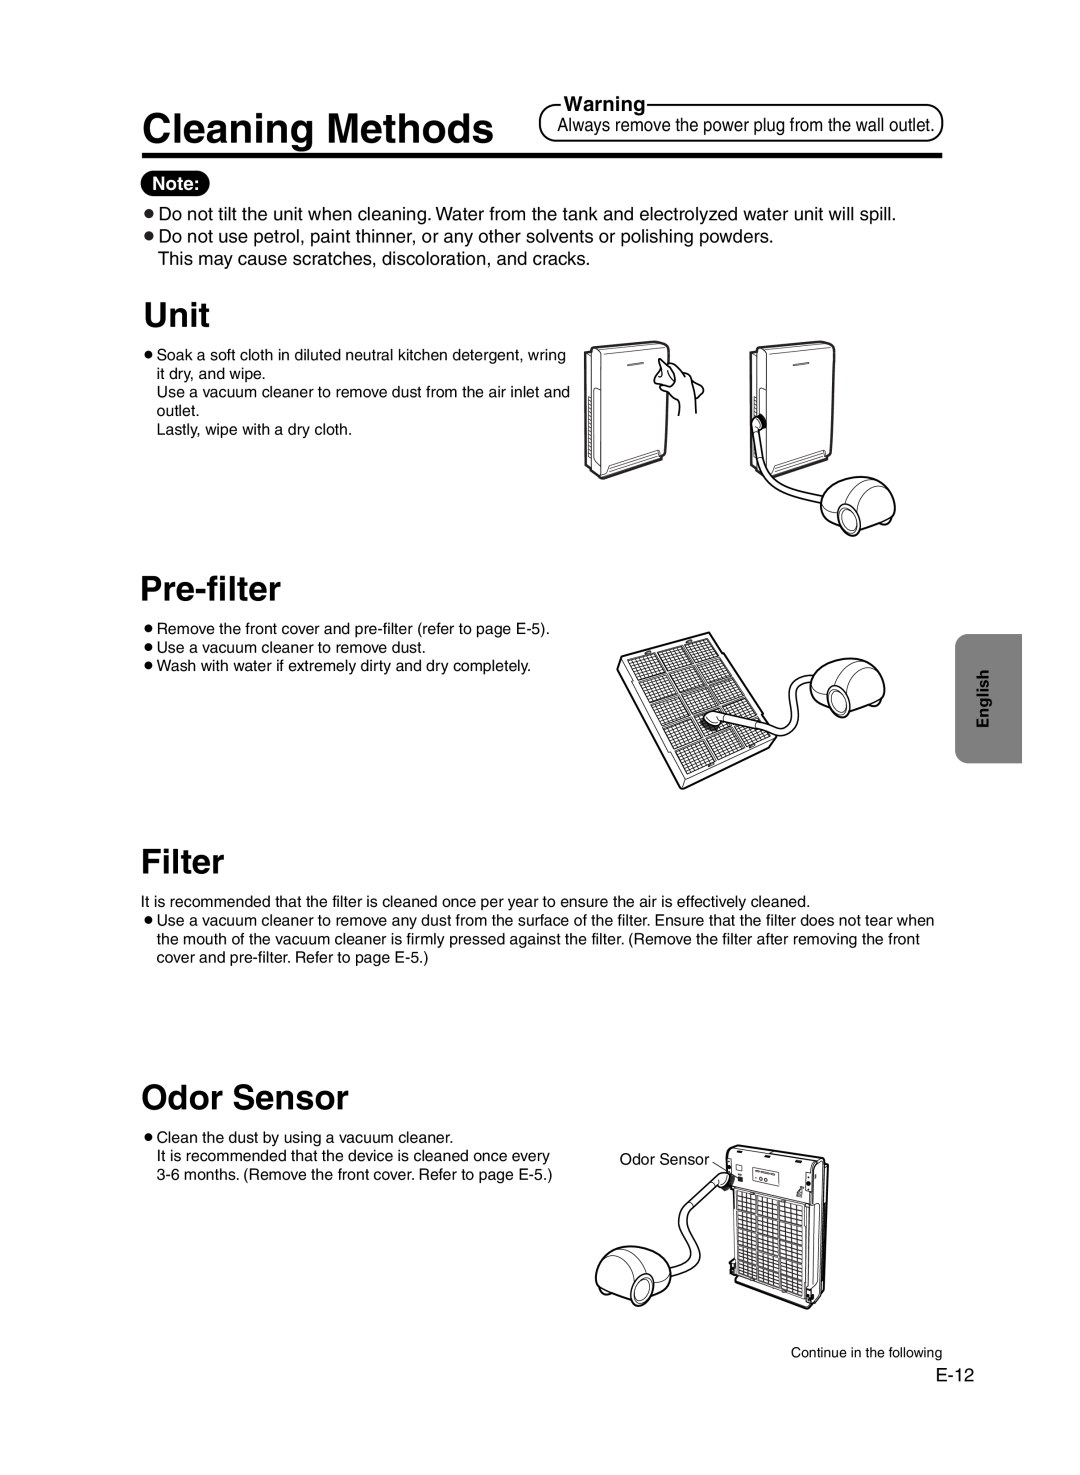 Sanyo ABC-VW24A instruction manual Cleaning Methods, Unit, Pre-filter, Filter, Odor Sensor 